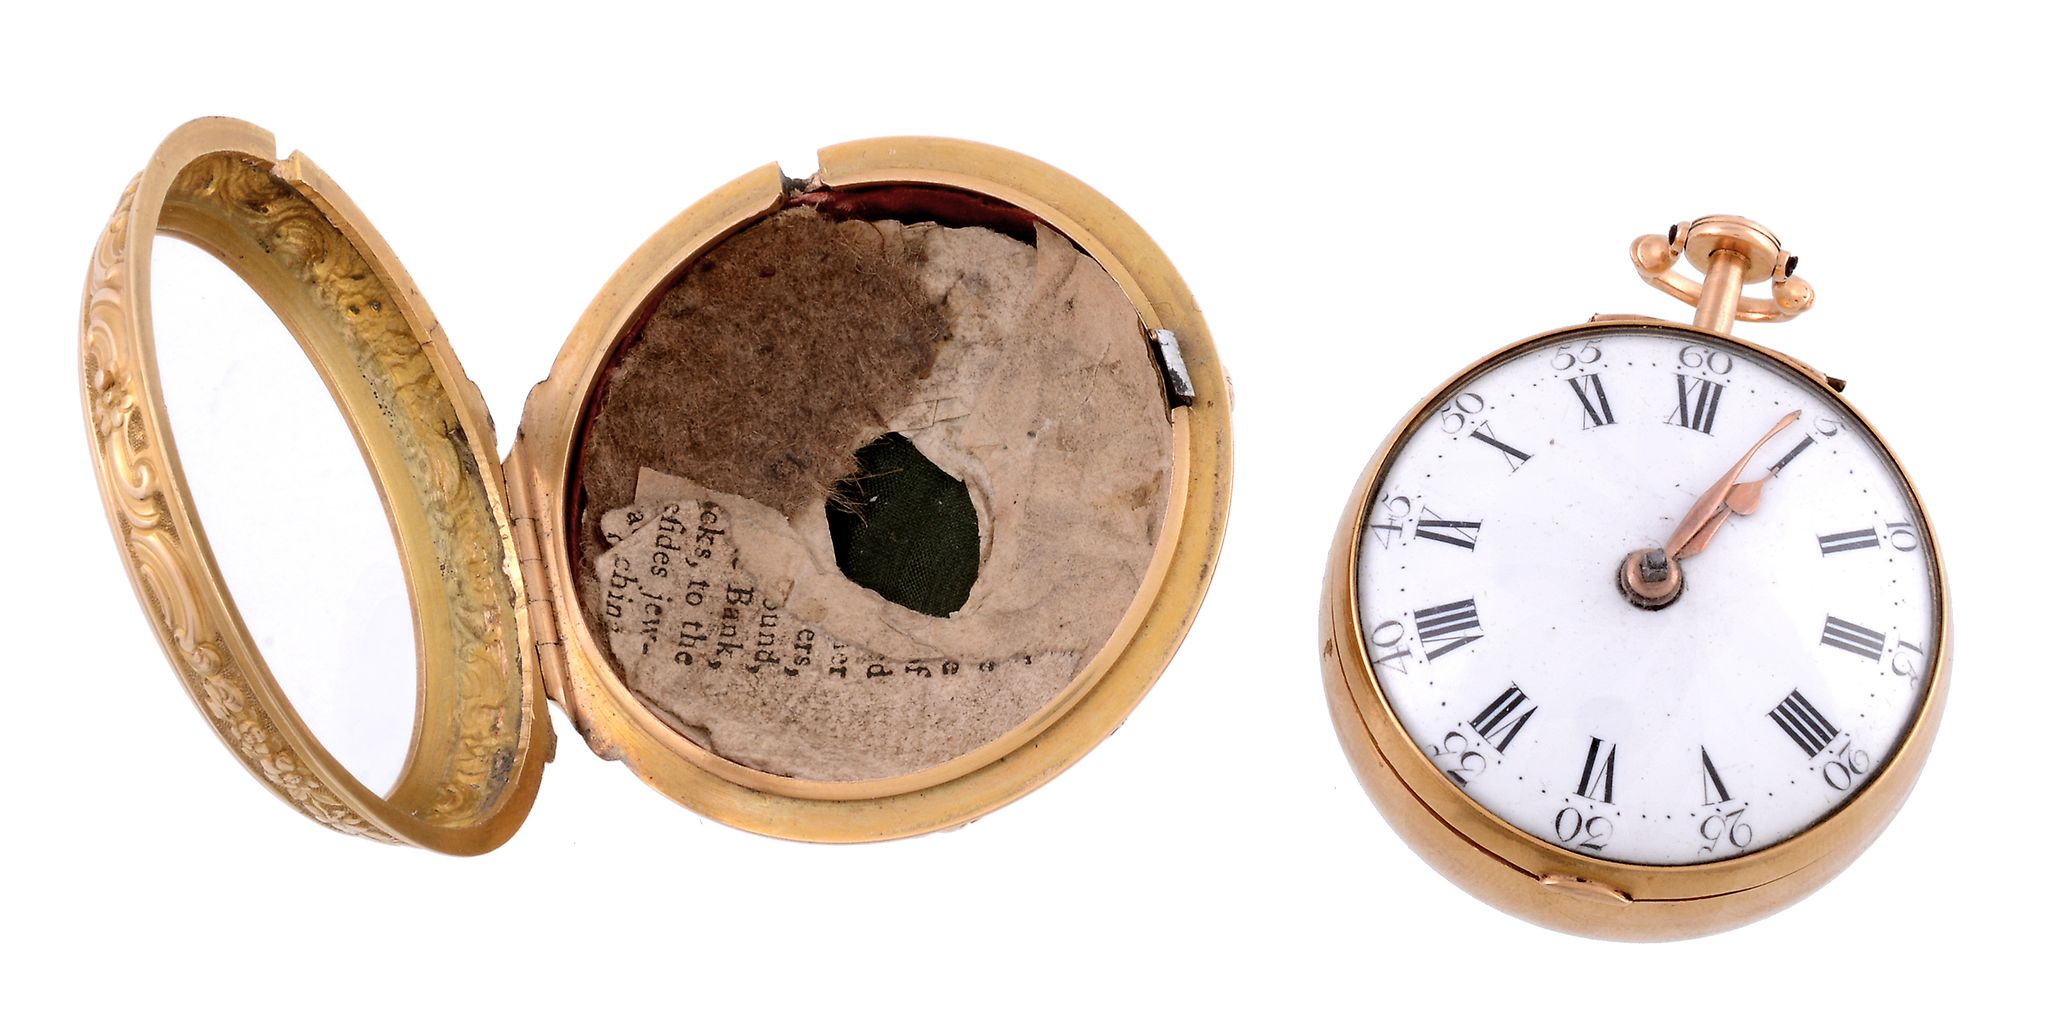 Wm. Turner, London, a 22 carat gold repousse pair cased pocket watch,   no. 9300, the inner case - Image 3 of 4